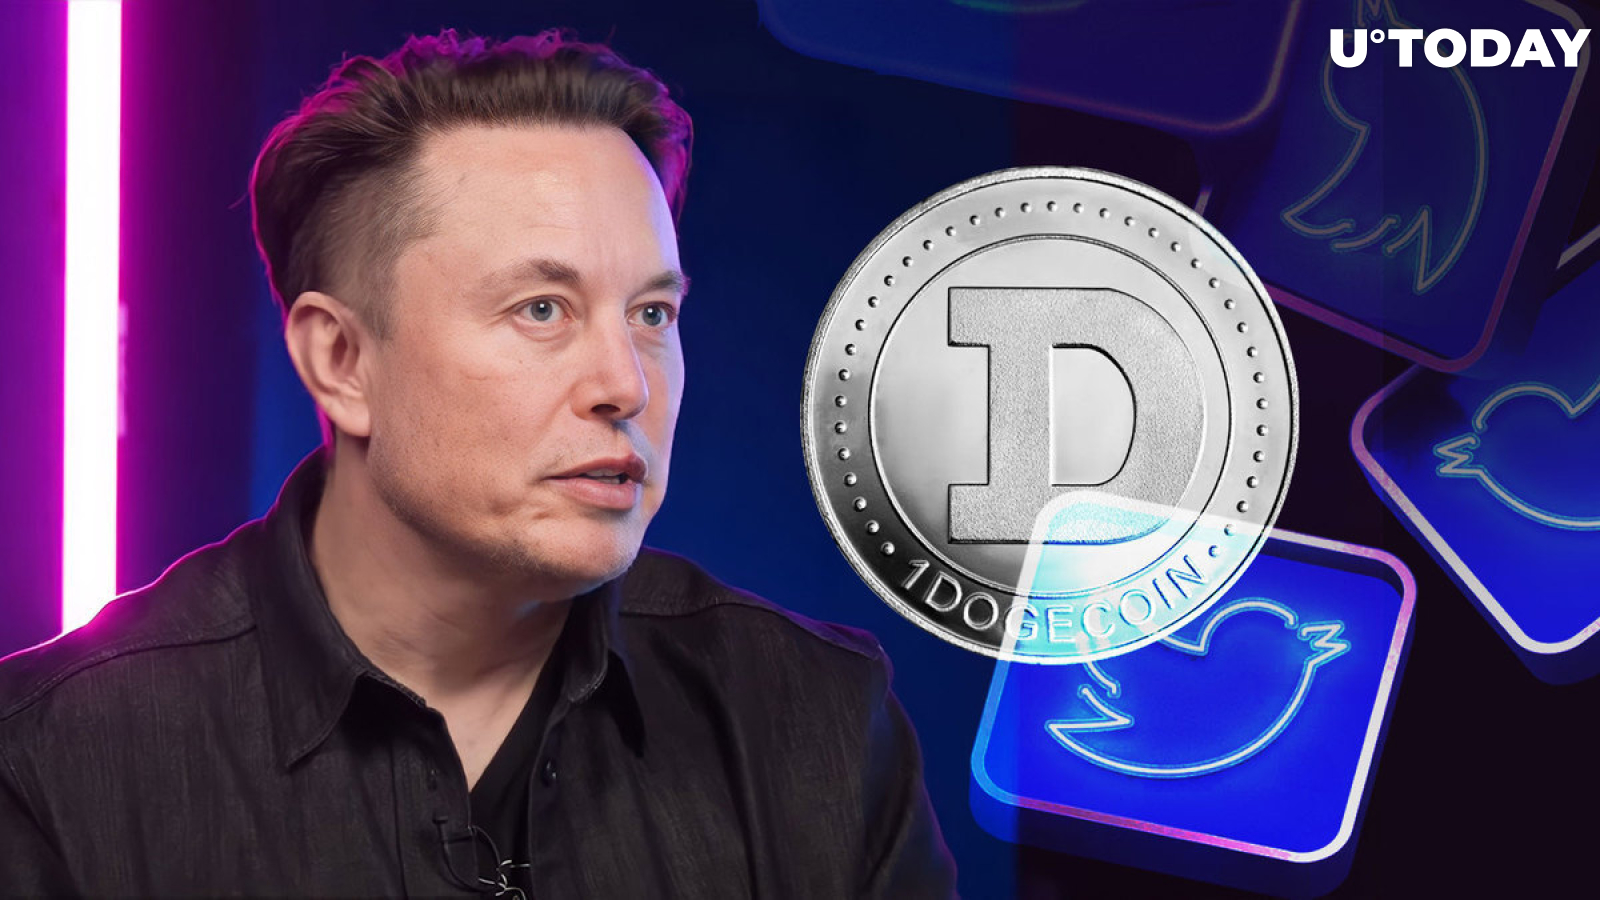 'Doge Day' 4/20: Dogecoin Founder Responds to Elon Musk's Tweet About Starship Ready for Launch